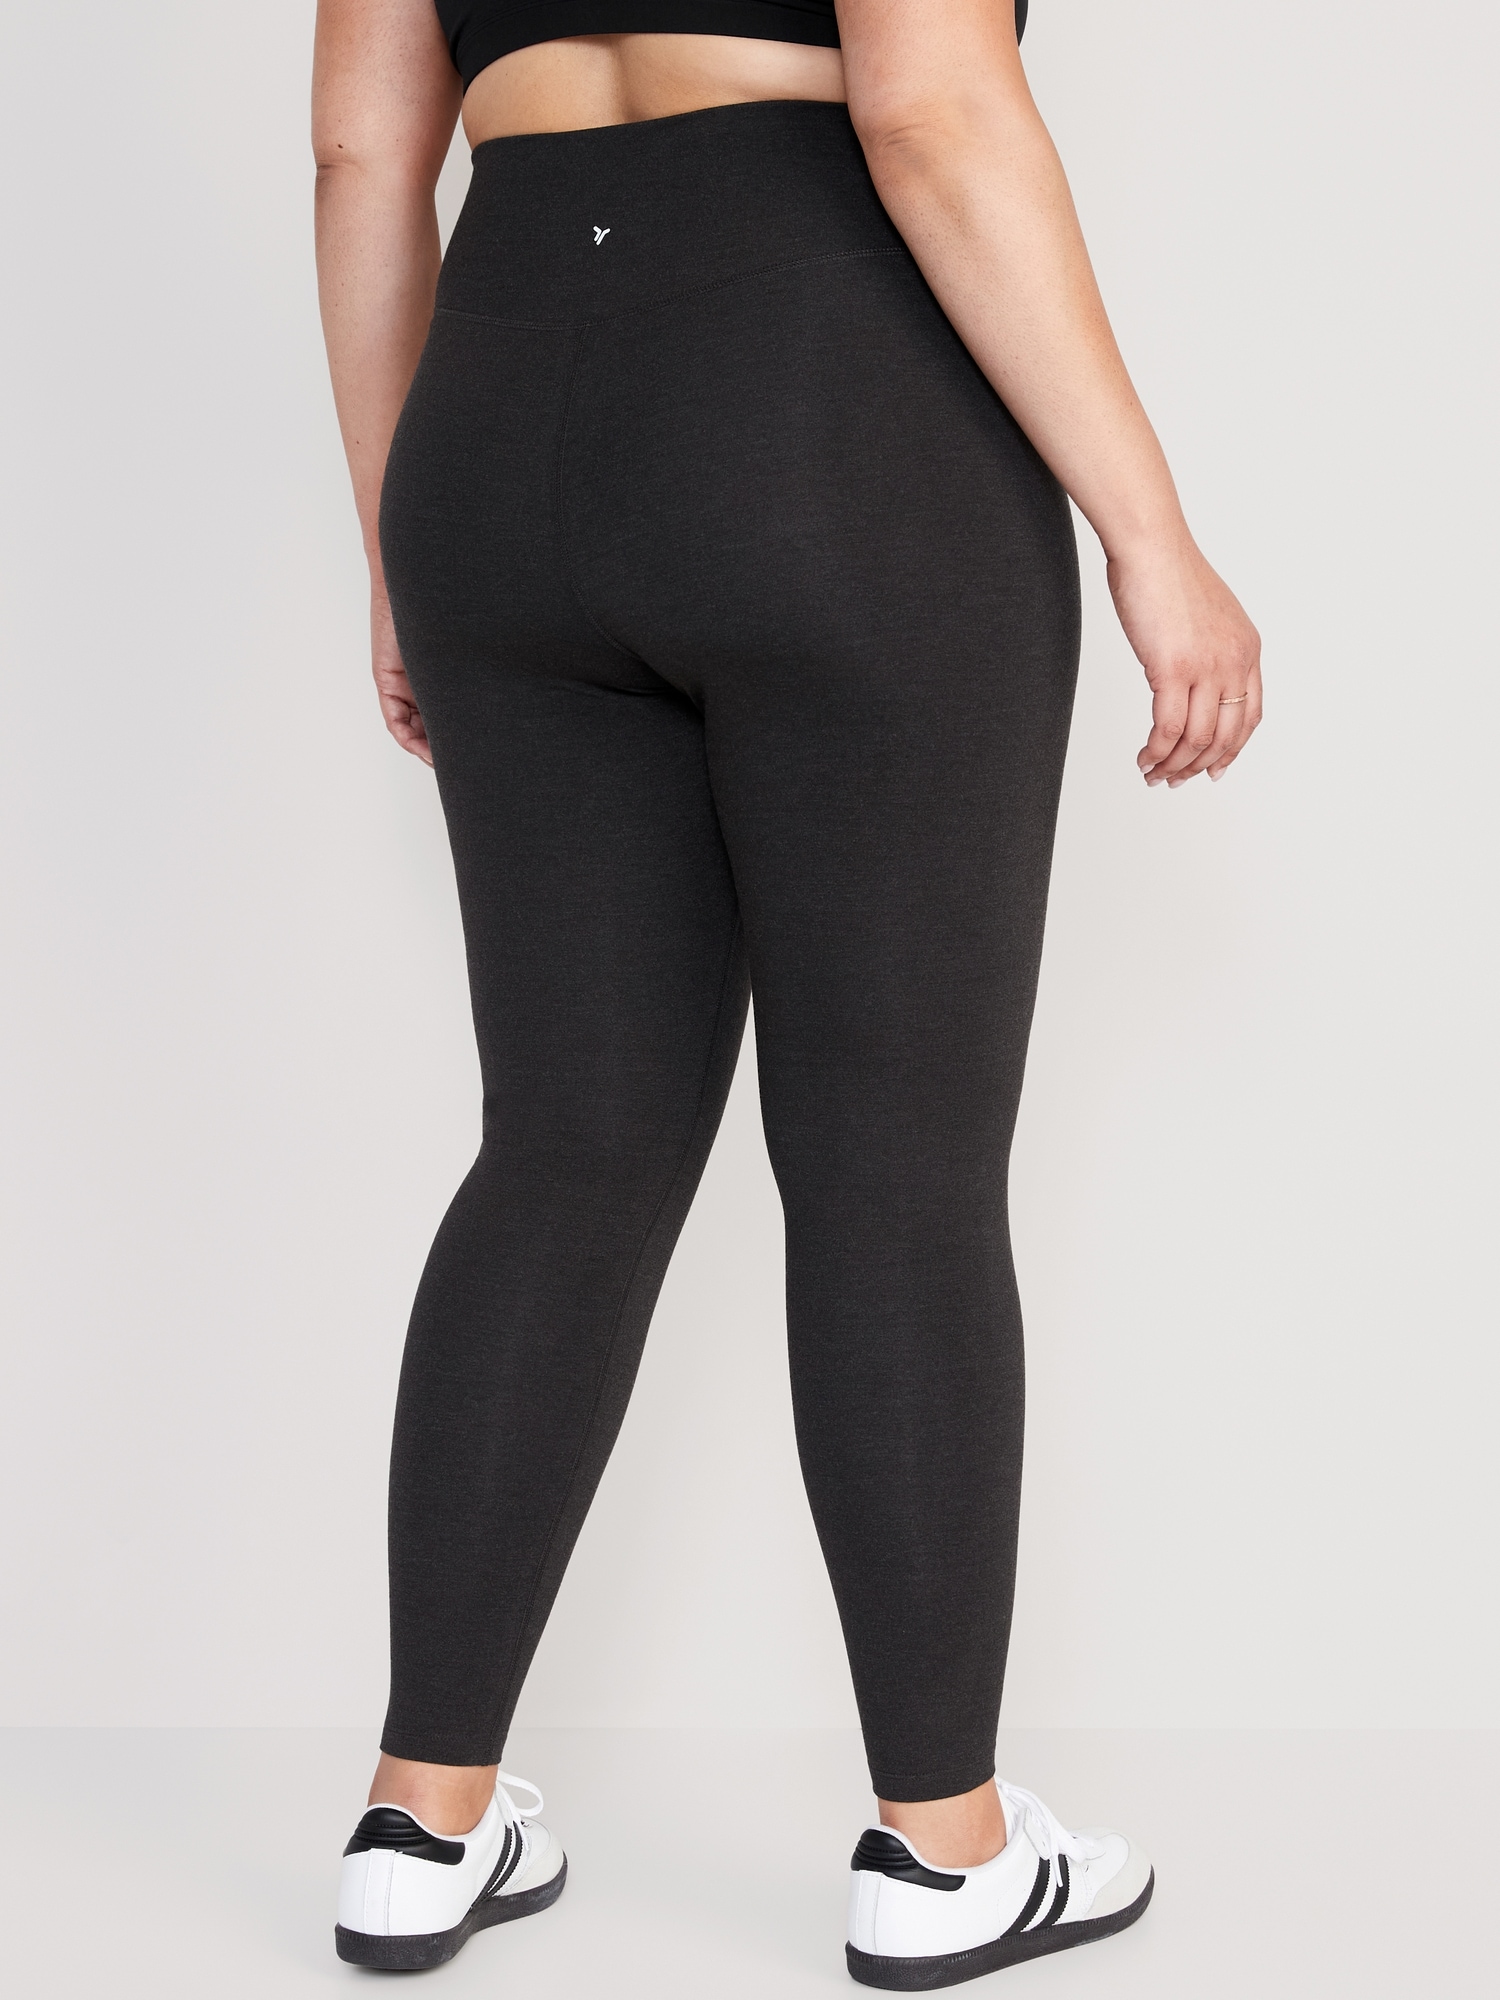 Women's Plus Size High Waist Stretchy Knot Front Solid Leggings